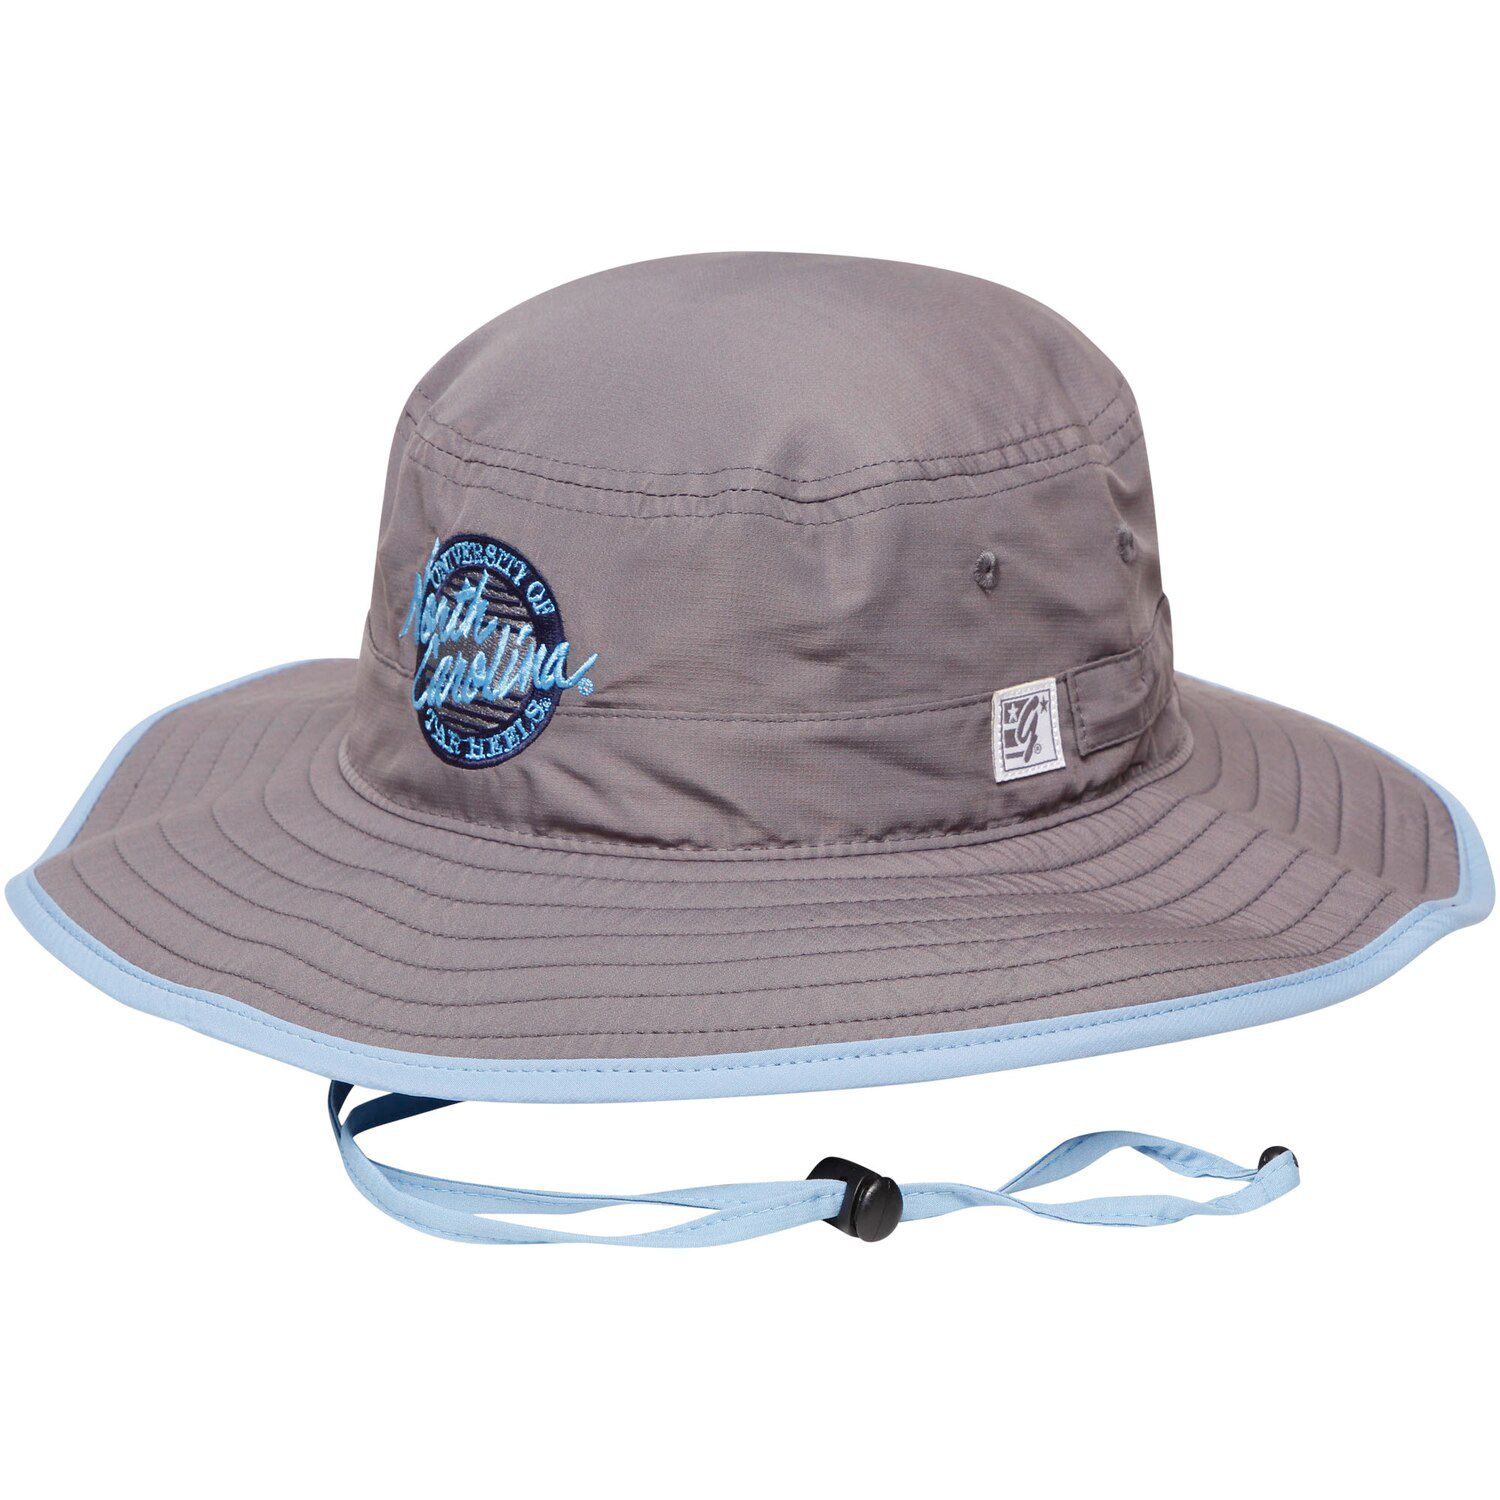 Image for Unbranded Men's The Game Gray North Carolina Tar Heels Classic Circle Ultralight Adjustable Boonie Bucket Hat at Kohl's.